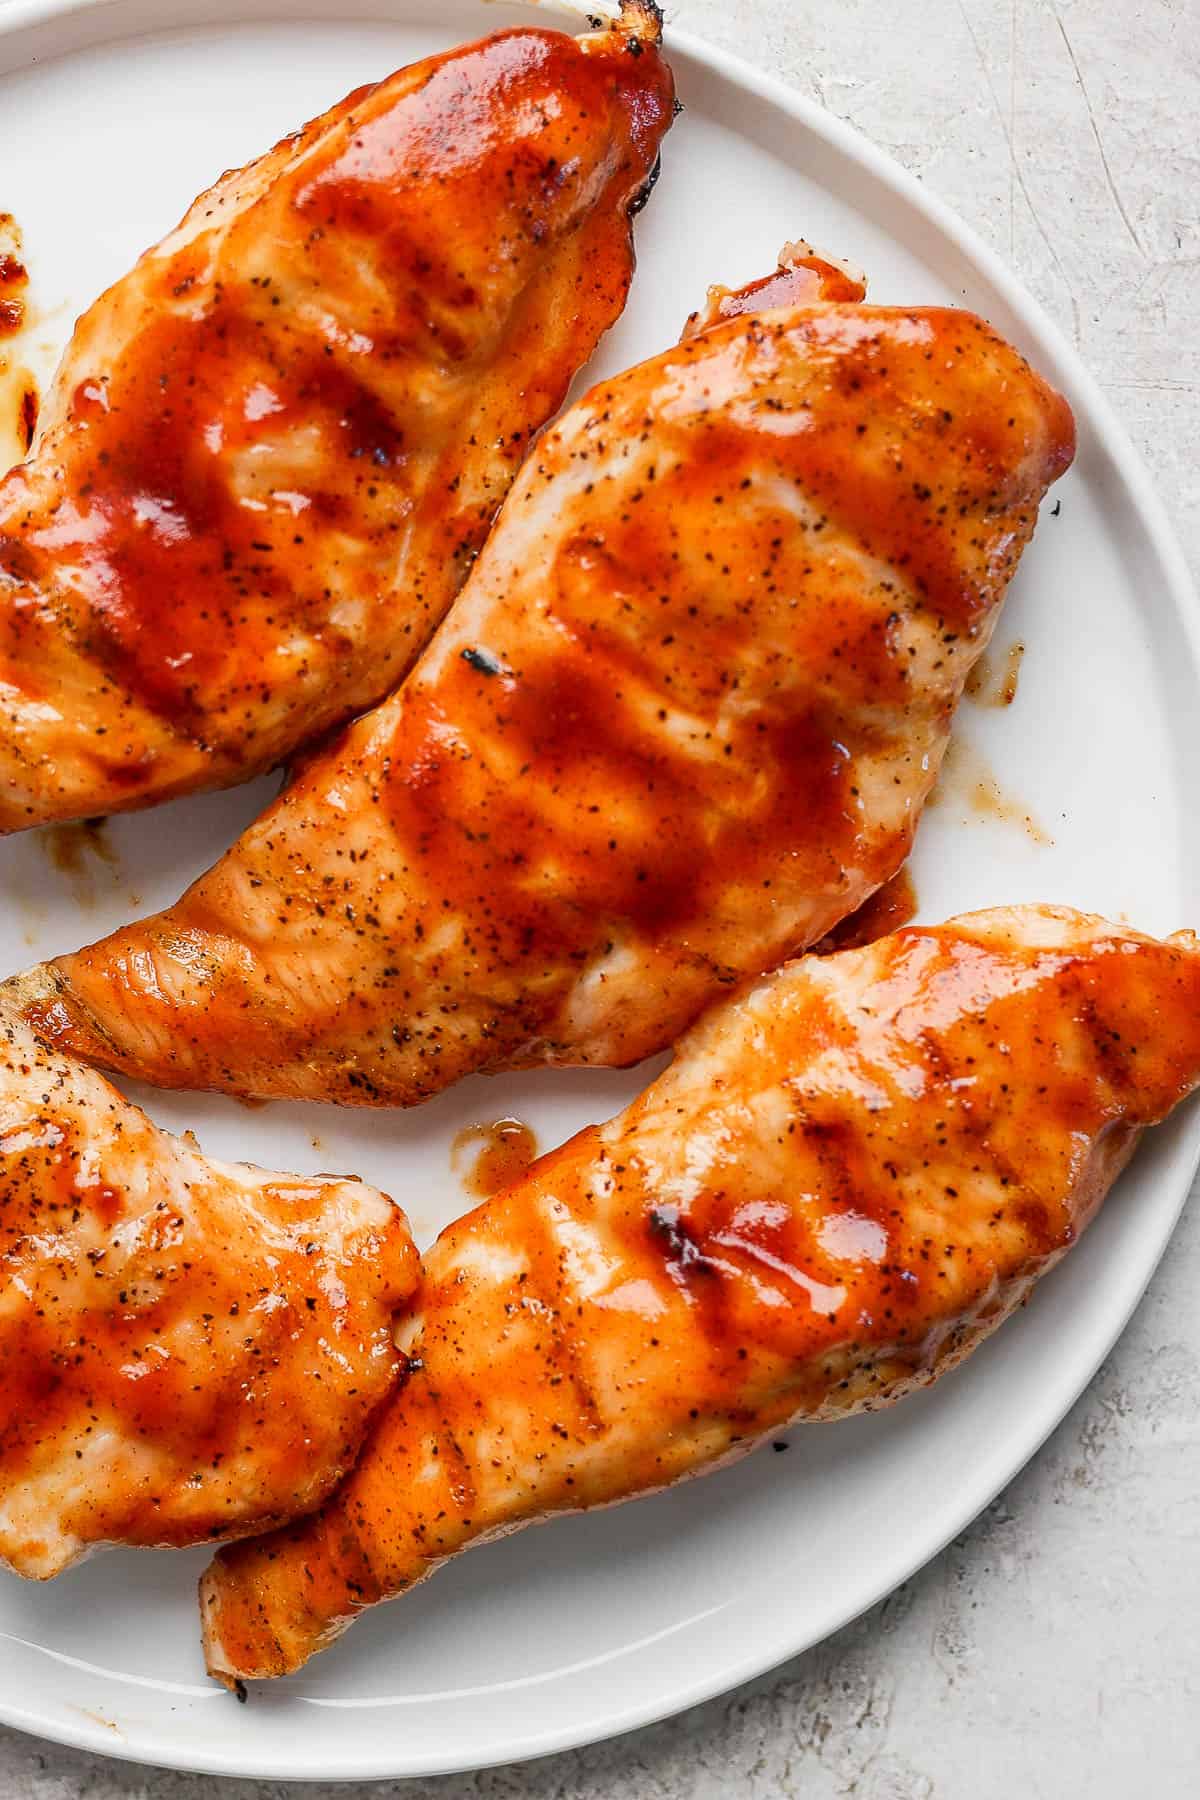 Grilled bbq chicken breasts on a plate.